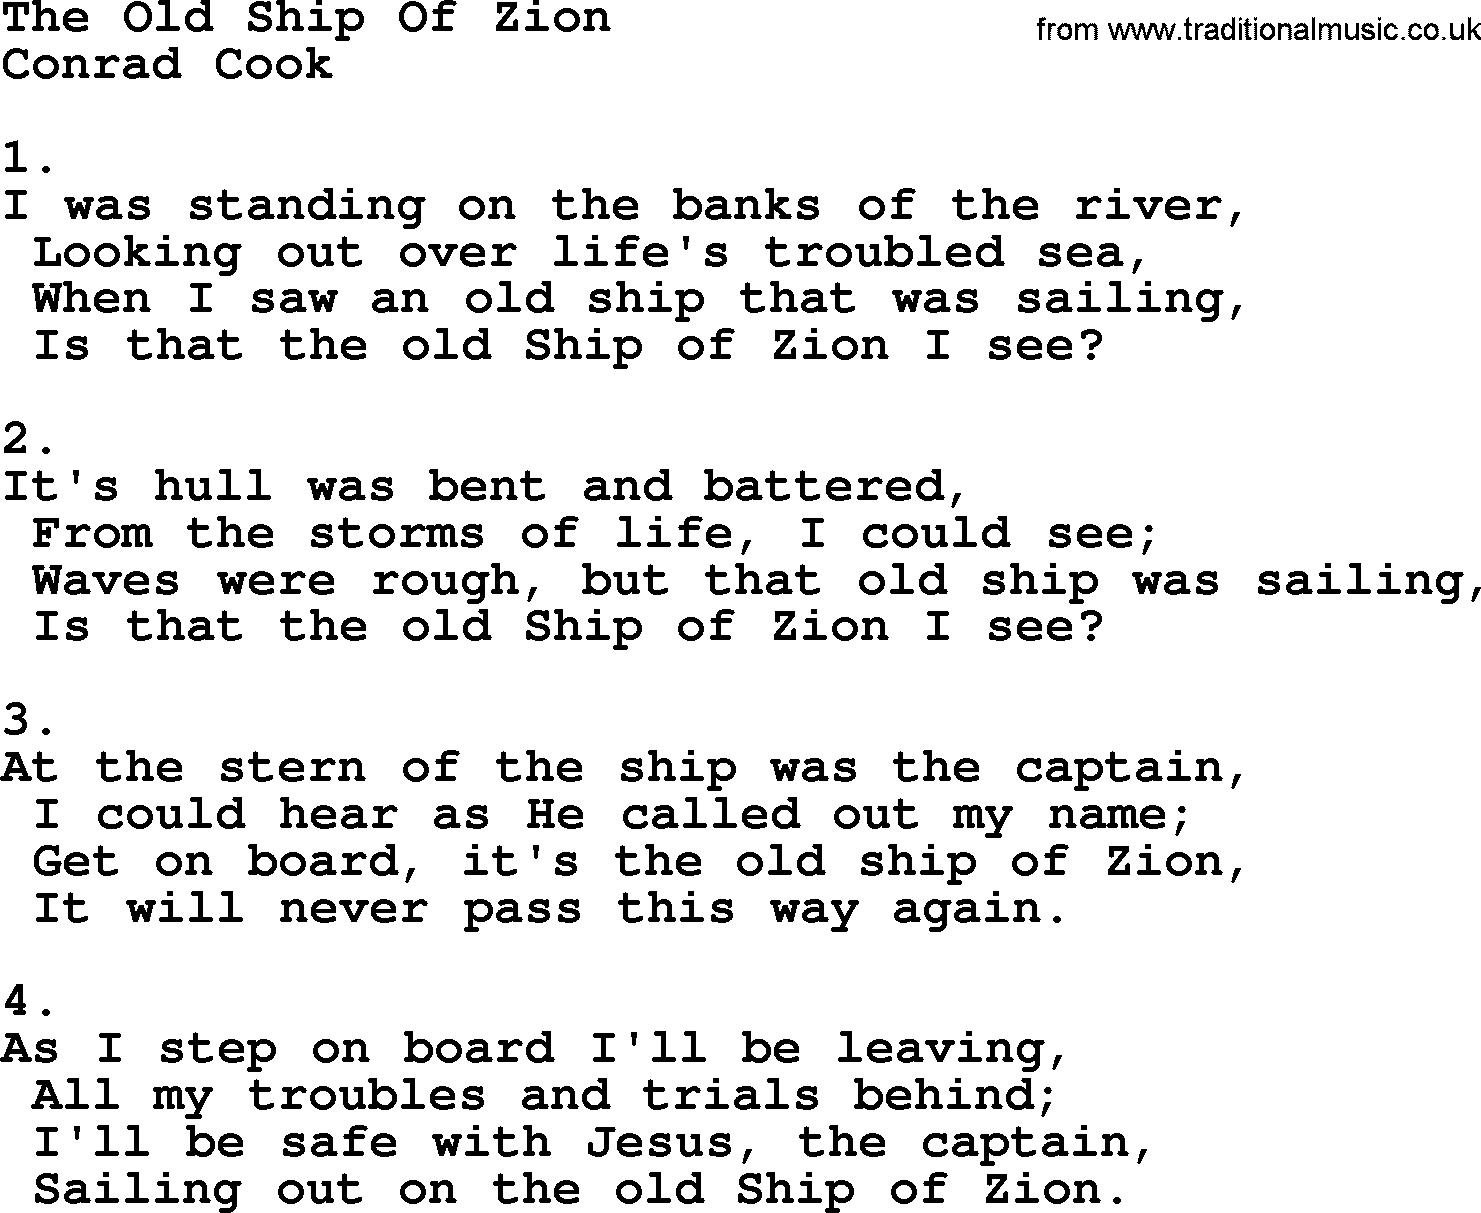 The Old Ship Of Zion - Apostolic and Pentecostal Hymns and Songs lyrics